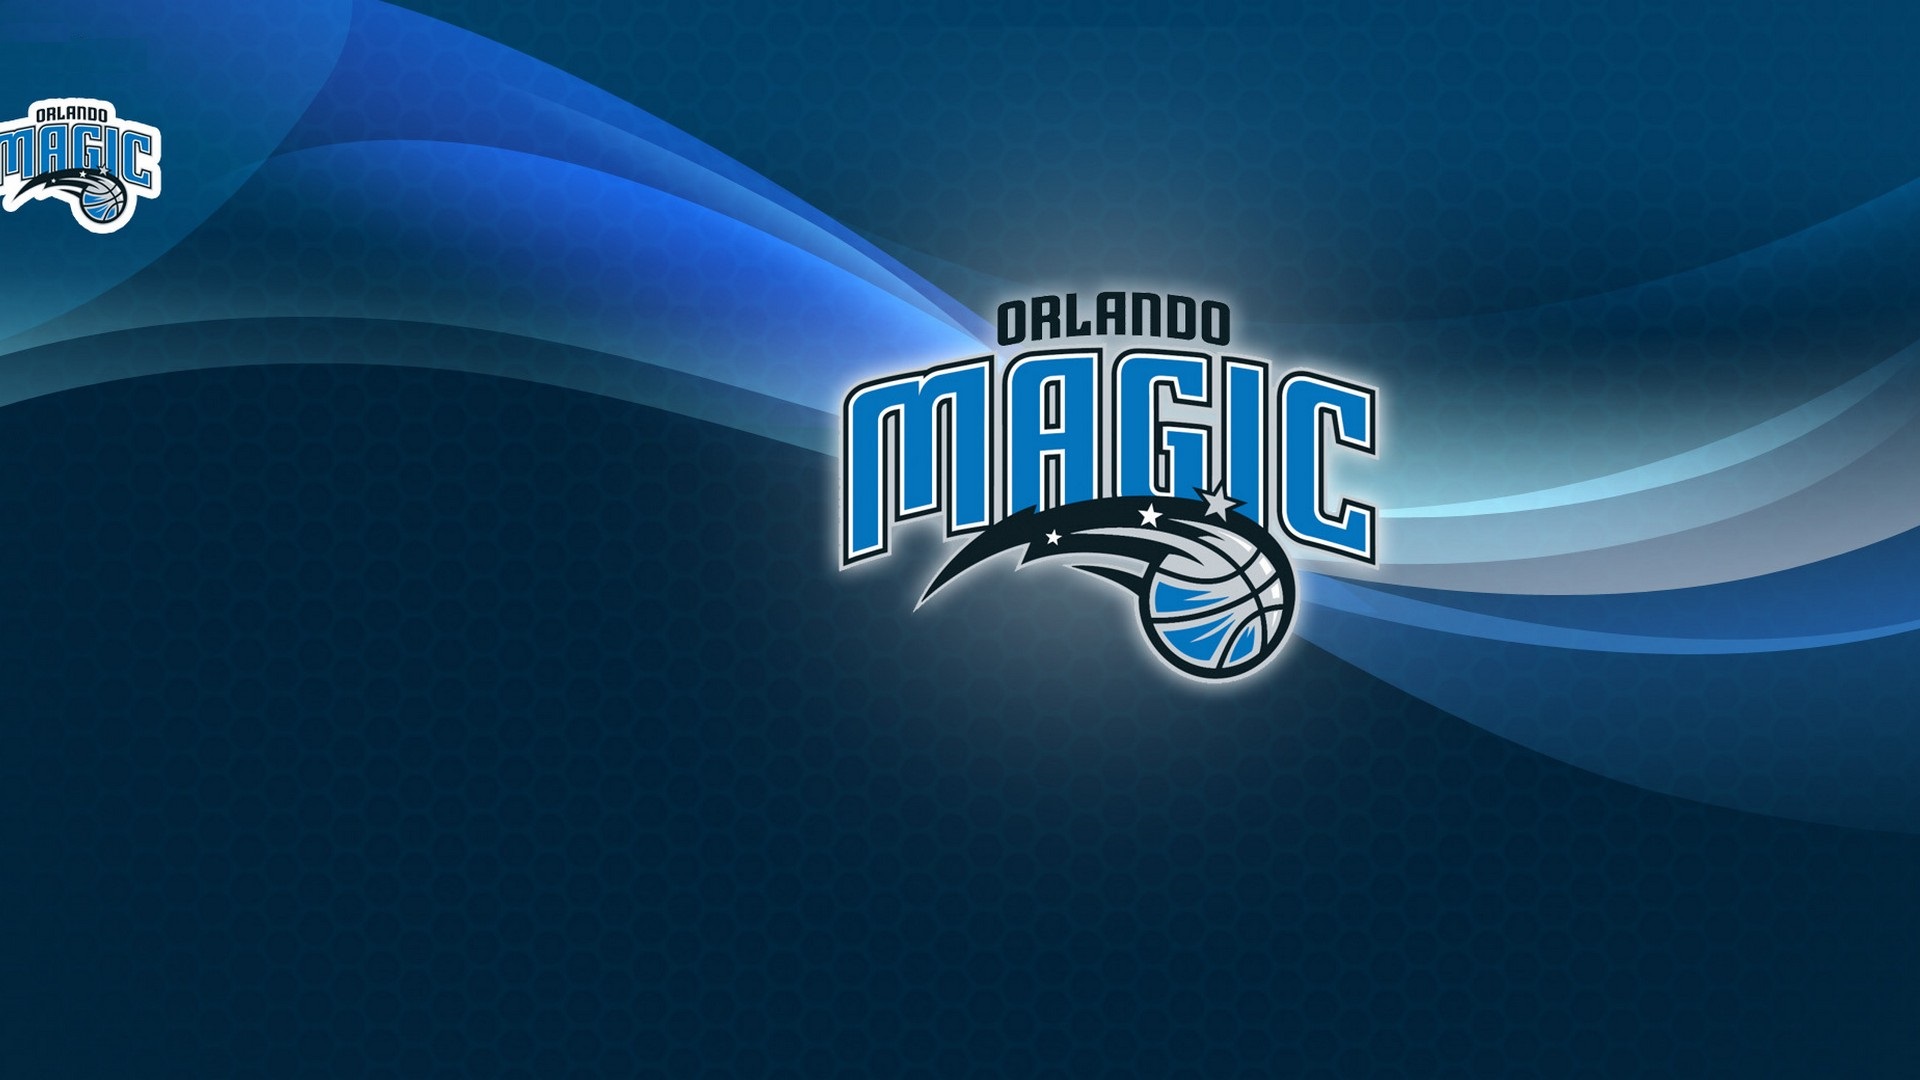 Orlando Magic NBA For Mac Wallpaper With high-resolution 1920X1080 pixel. You can use this wallpaper for your Desktop Computer Backgrounds, Windows or Mac Screensavers, iPhone Lock screen, Tablet or Android and another Mobile Phone device